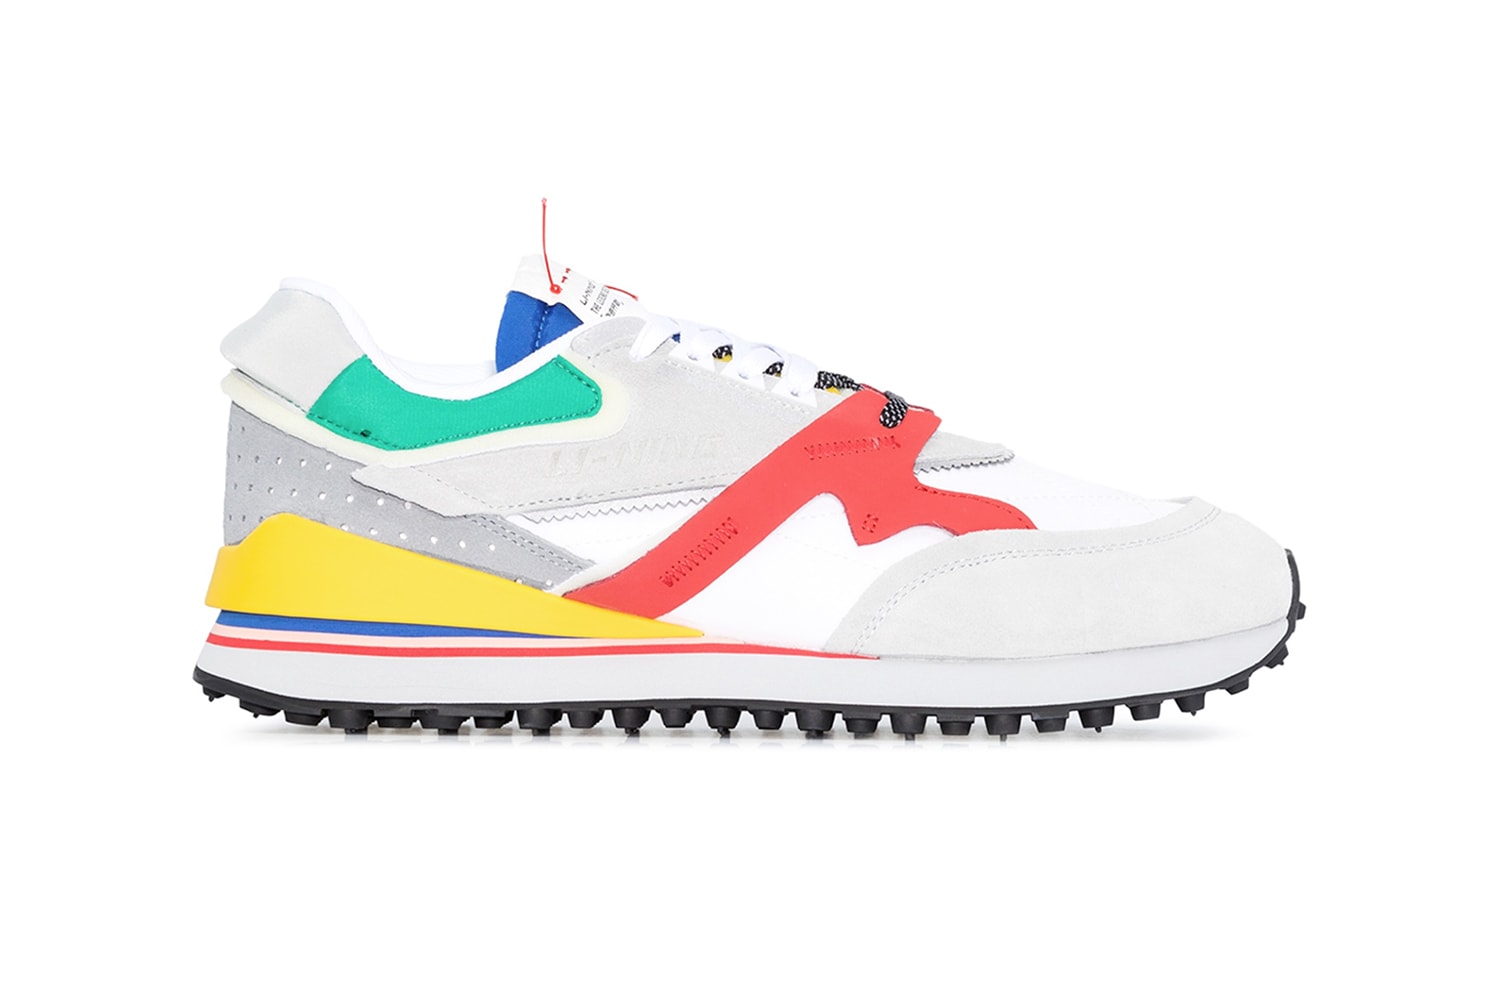 LI-NING Multicolor Paneled Moment Sneakers Release Info gray colorblocking suede flex groove midsole browns fashion footwear retro running shoes drop date price 15045777 / AGCP3131 15045788 / AGCP3134 trainers